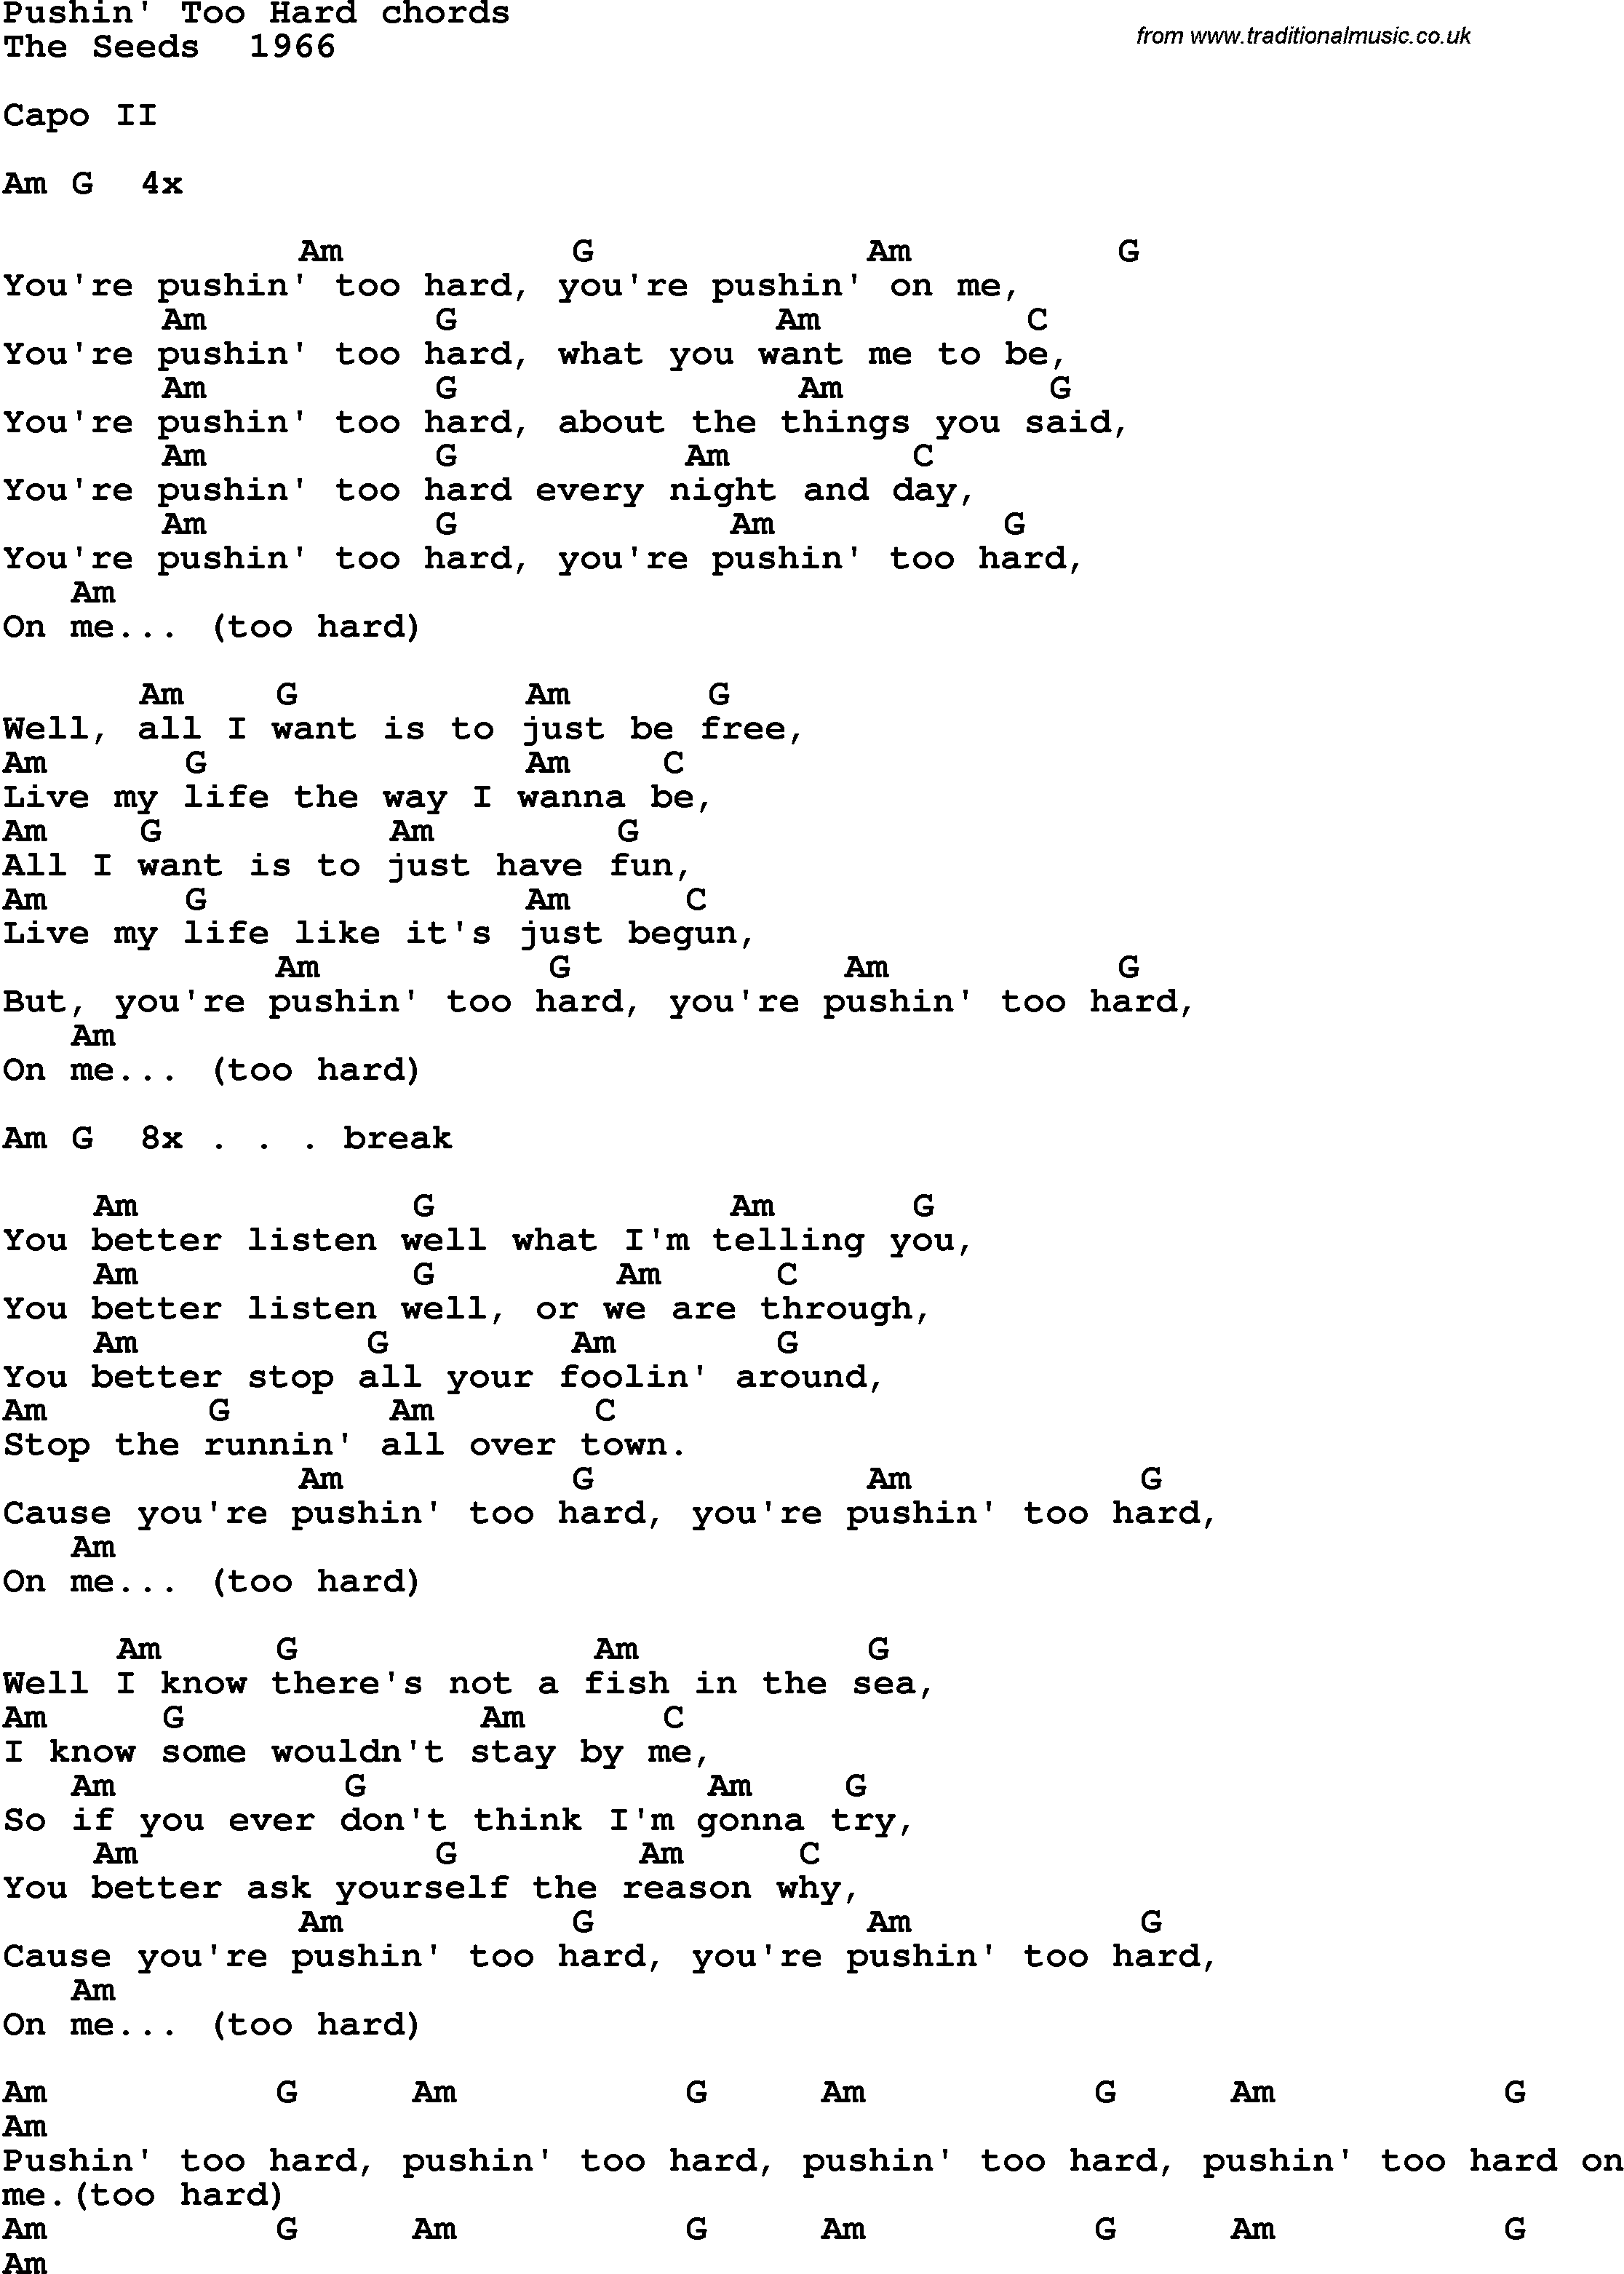 Song Lyrics with guitar chords for Pushin' Too Hard